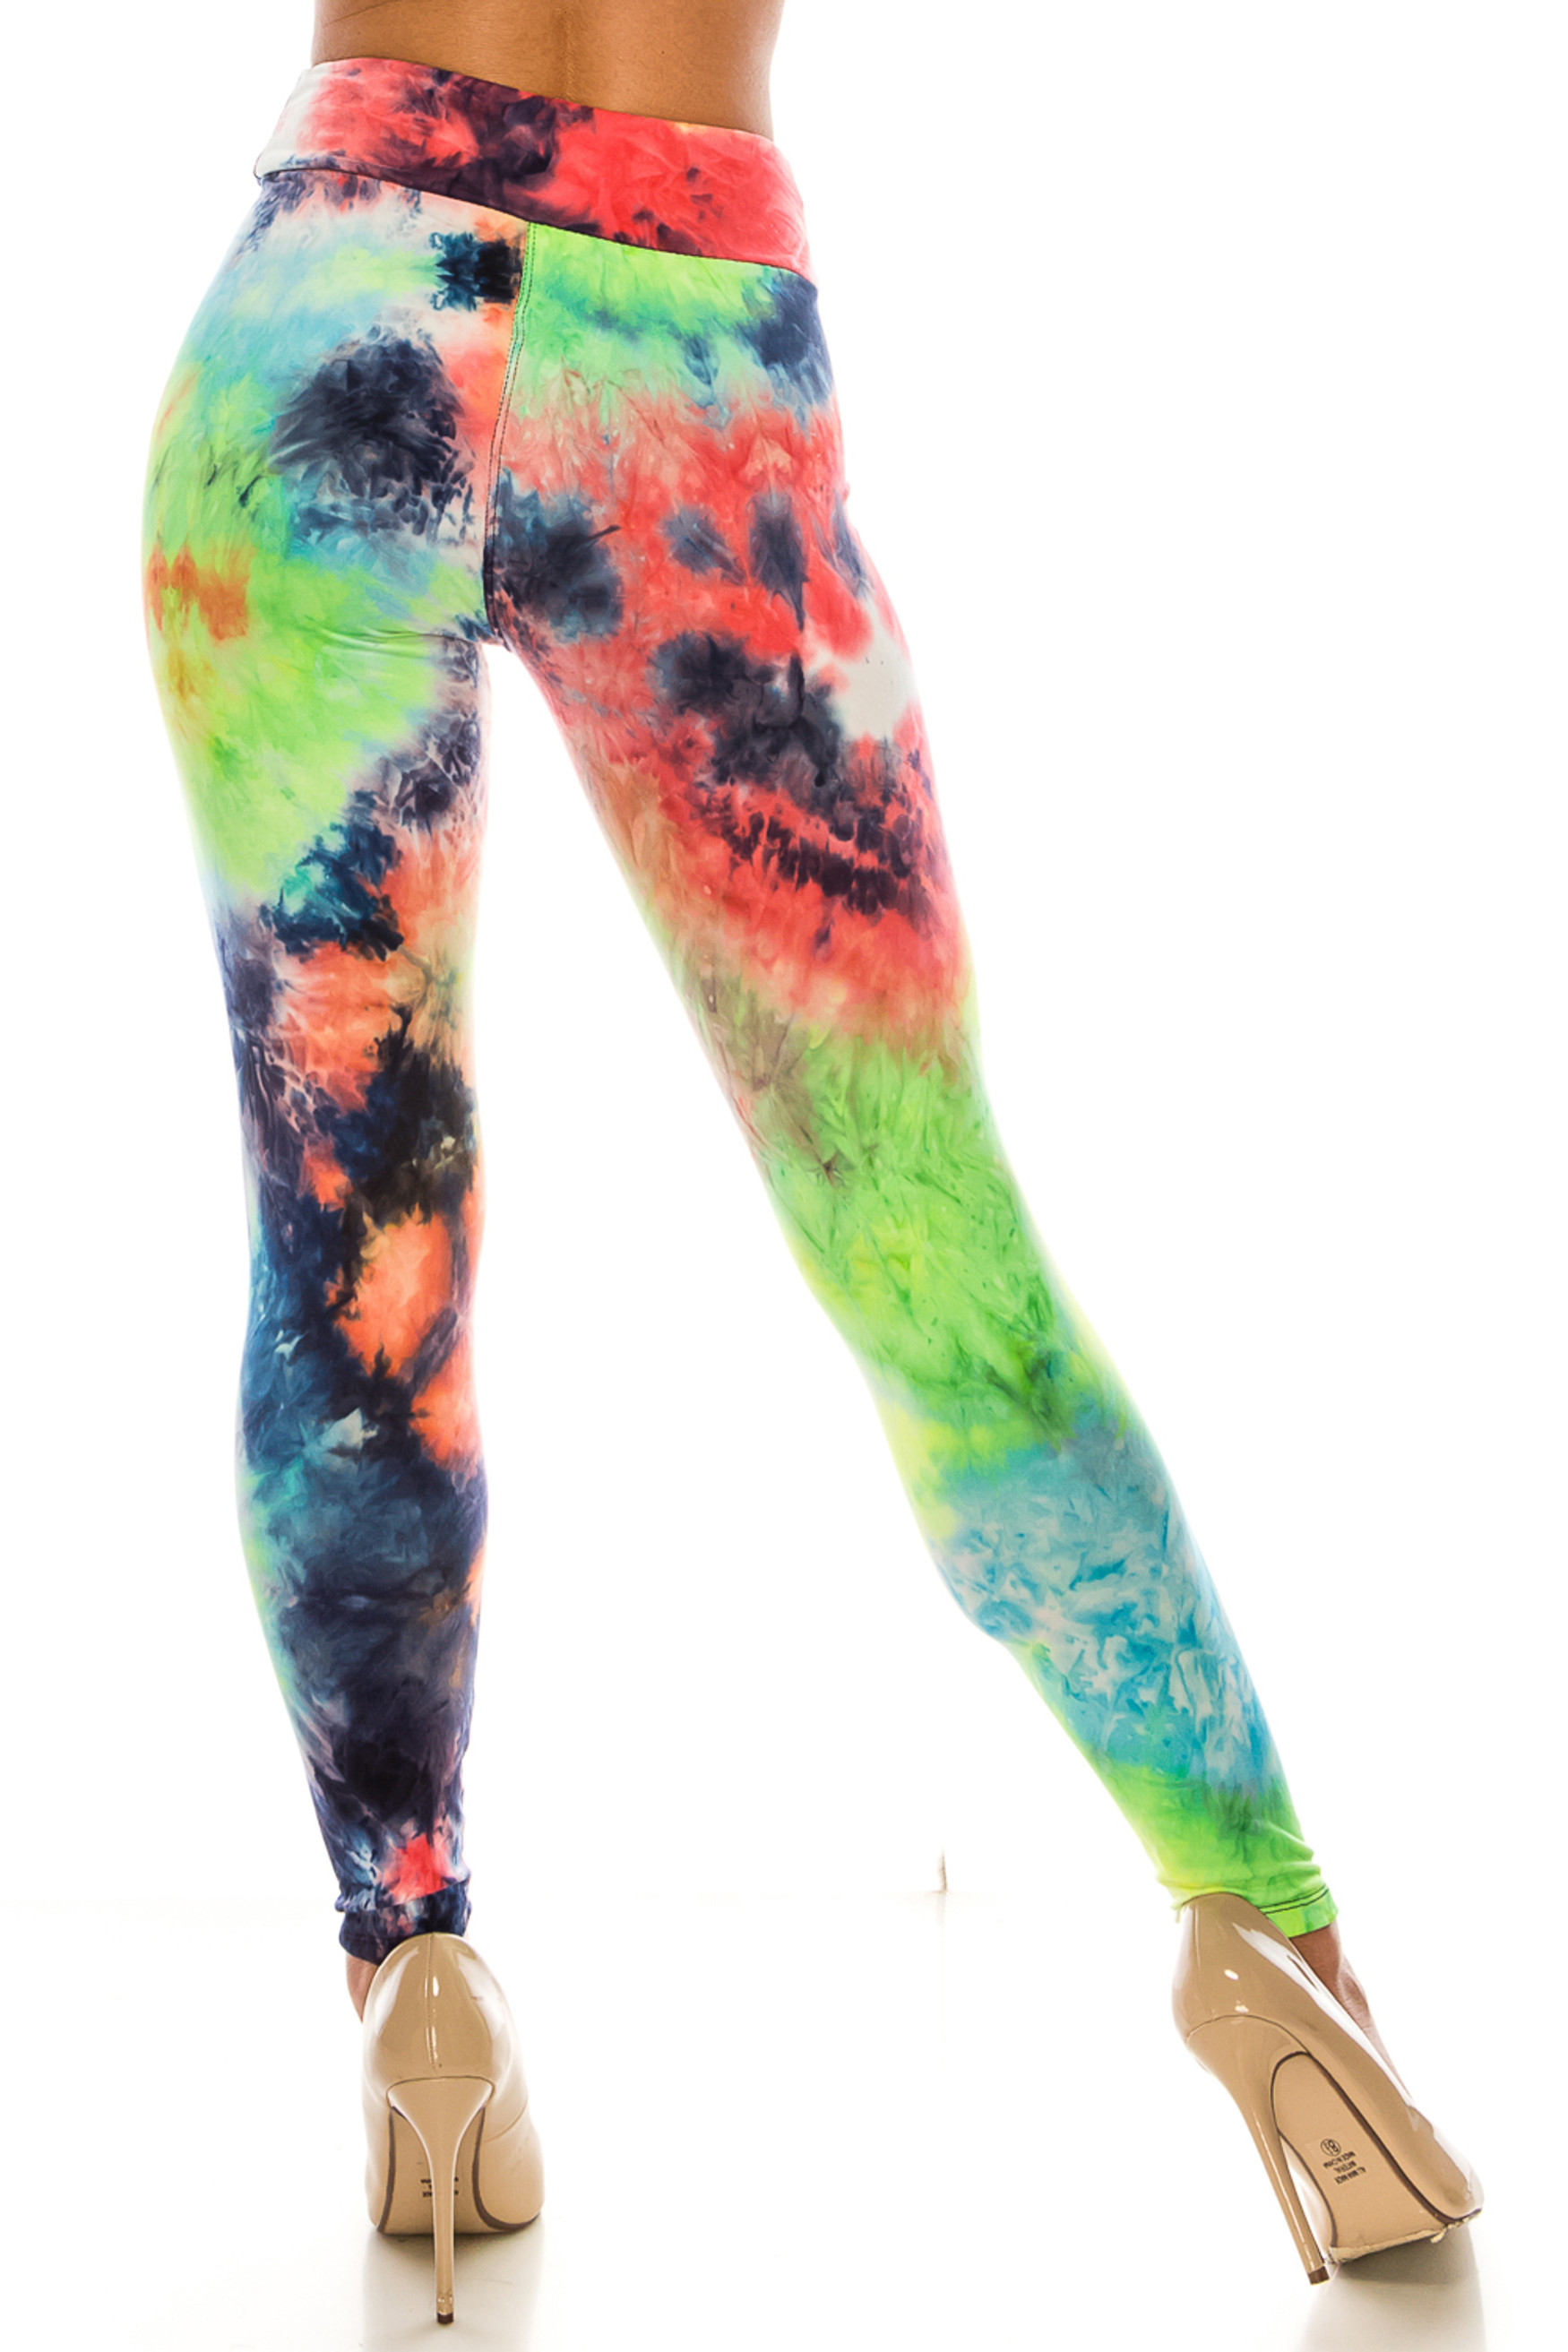 Rear view of Buttery Soft Summer Yellow Tie Dye High Waisted Leggings - Plus Size showing off the fabulous continuation of the rainbow colored design.